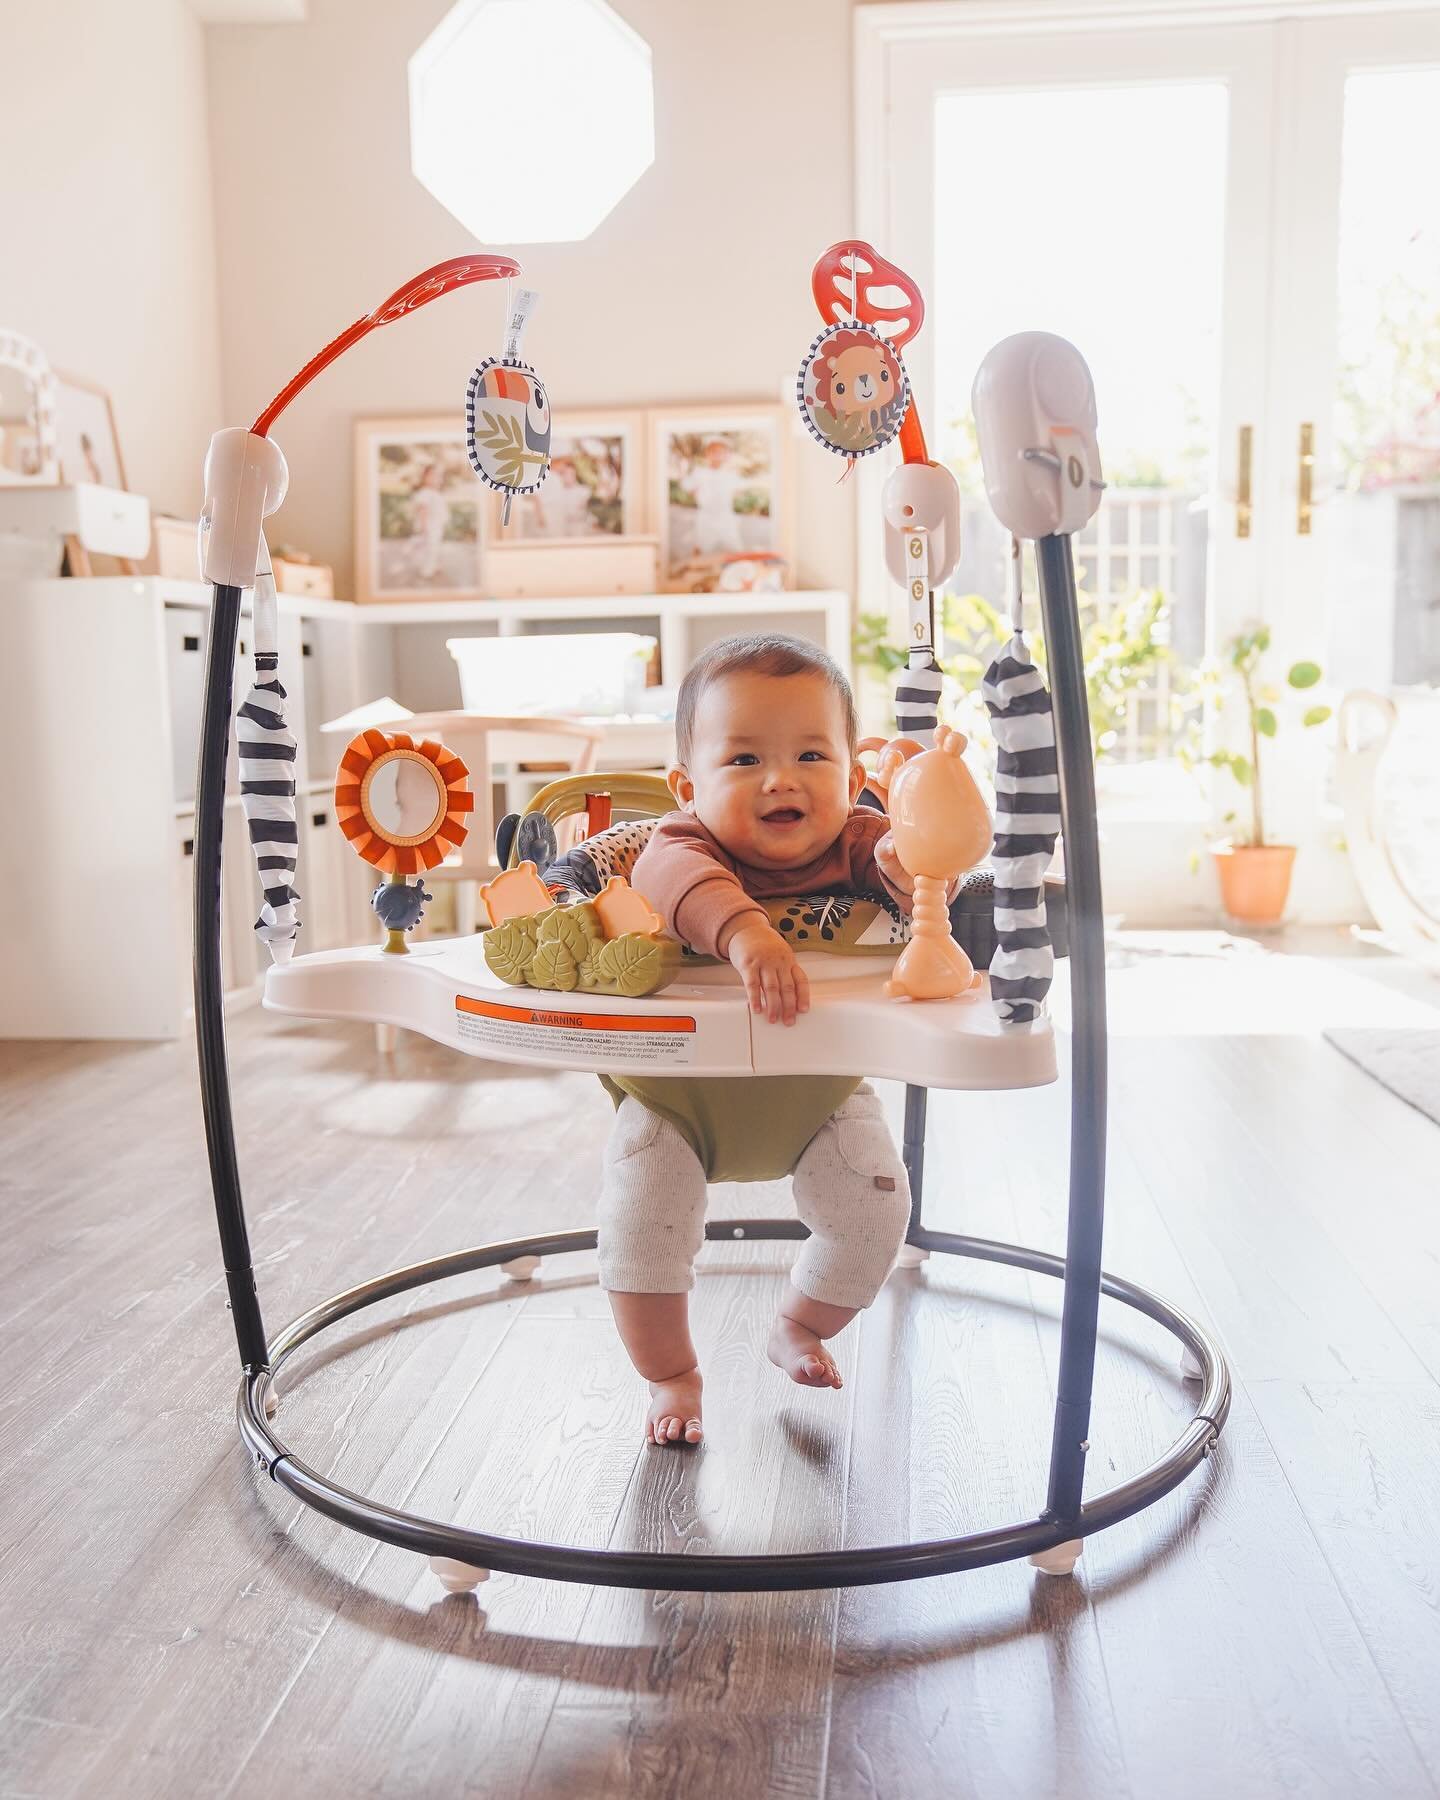 Adding more fun to the playroom with Ezra&rsquo;s activity center from @FisherPrice! 😍🥹

Look at that smile omg 😭😭 My Ezra bear is growing so much and of course that means finding play things and activities that keep him entertained and help deve